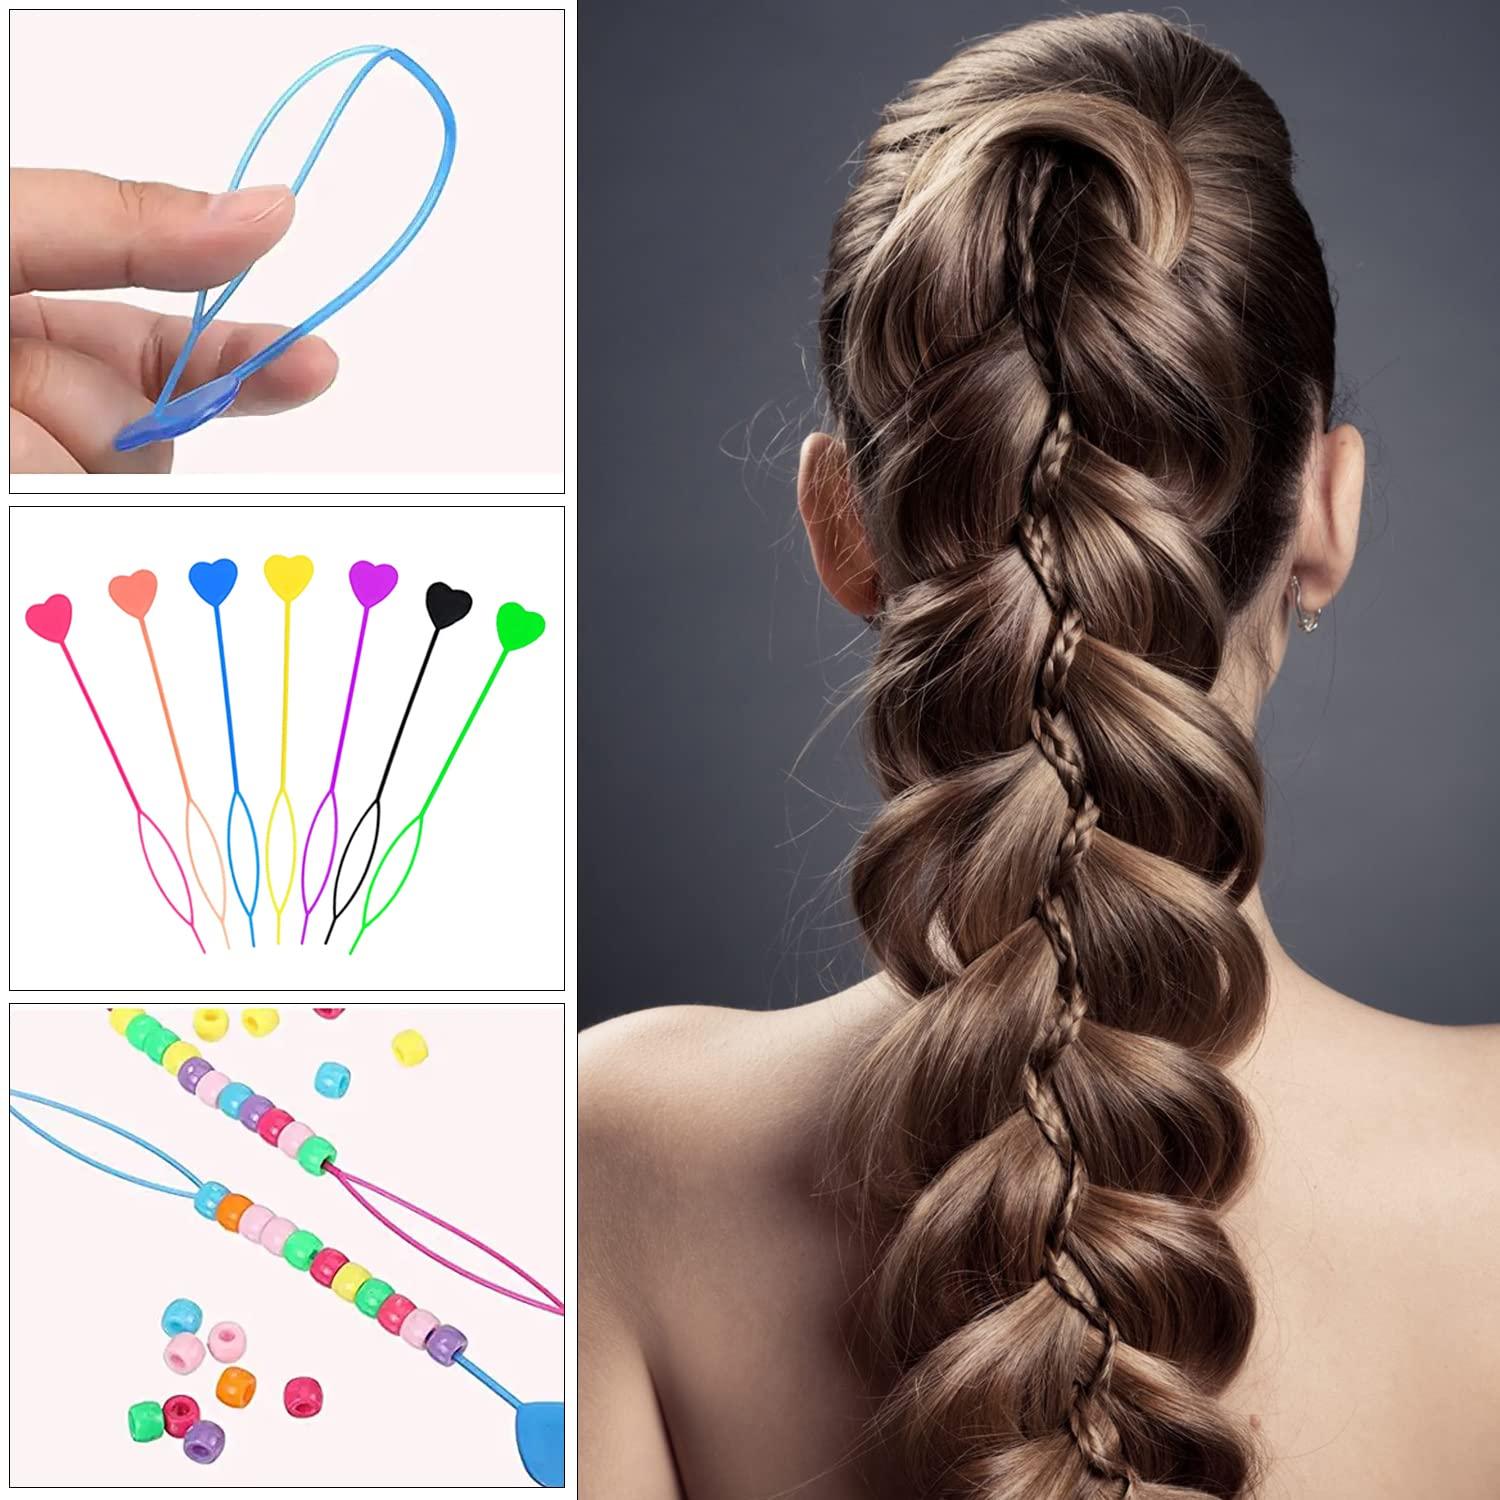  20 Pcs Quick Beader for Hair Braids Hair Beader Tools for  Loading Beads on Hair Braids Ponytail Maker Styling Tool Beader for Kids  Girls and Women with 200 Pcs Elastic